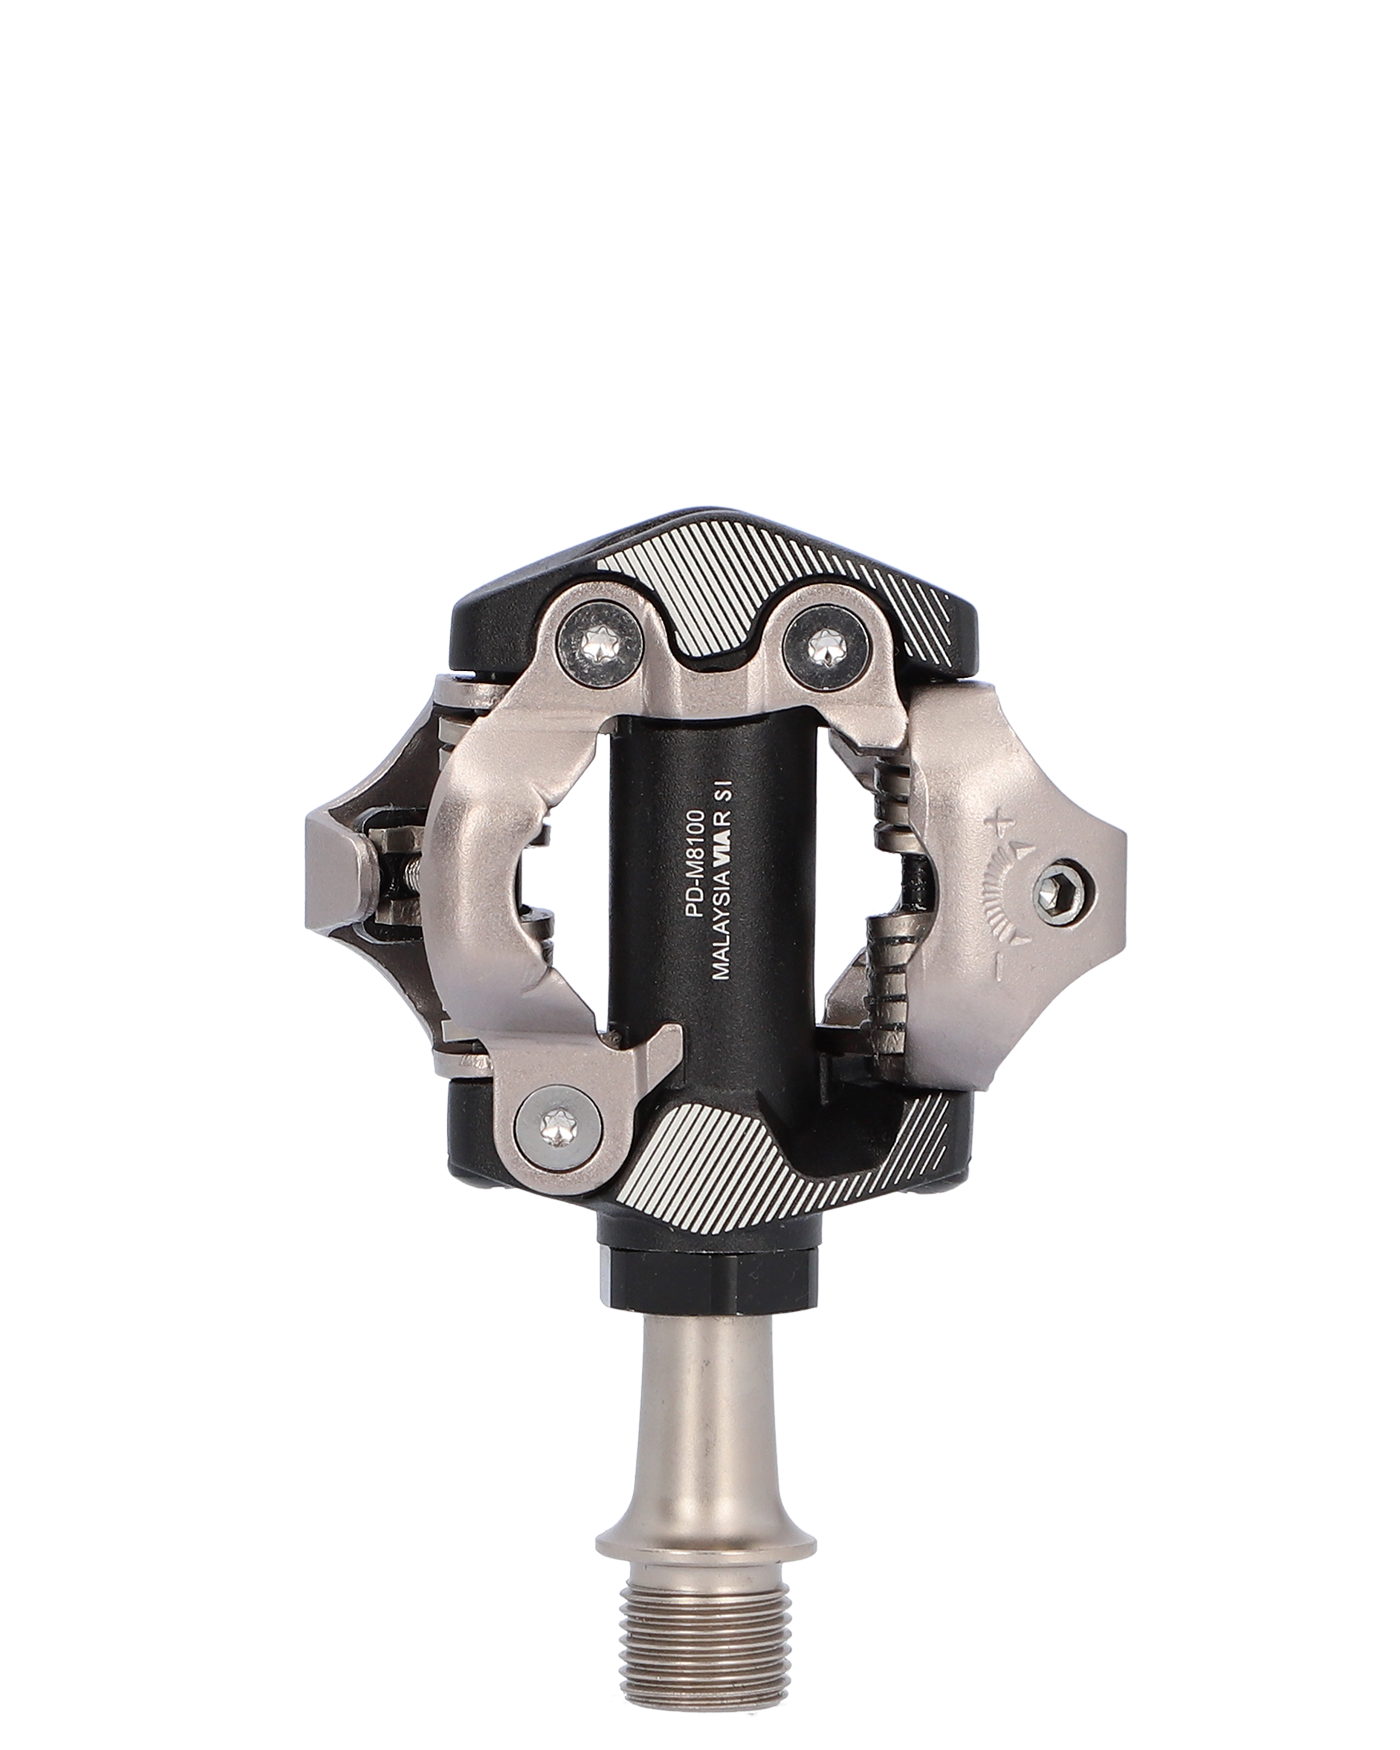 shimano deore xt pedals